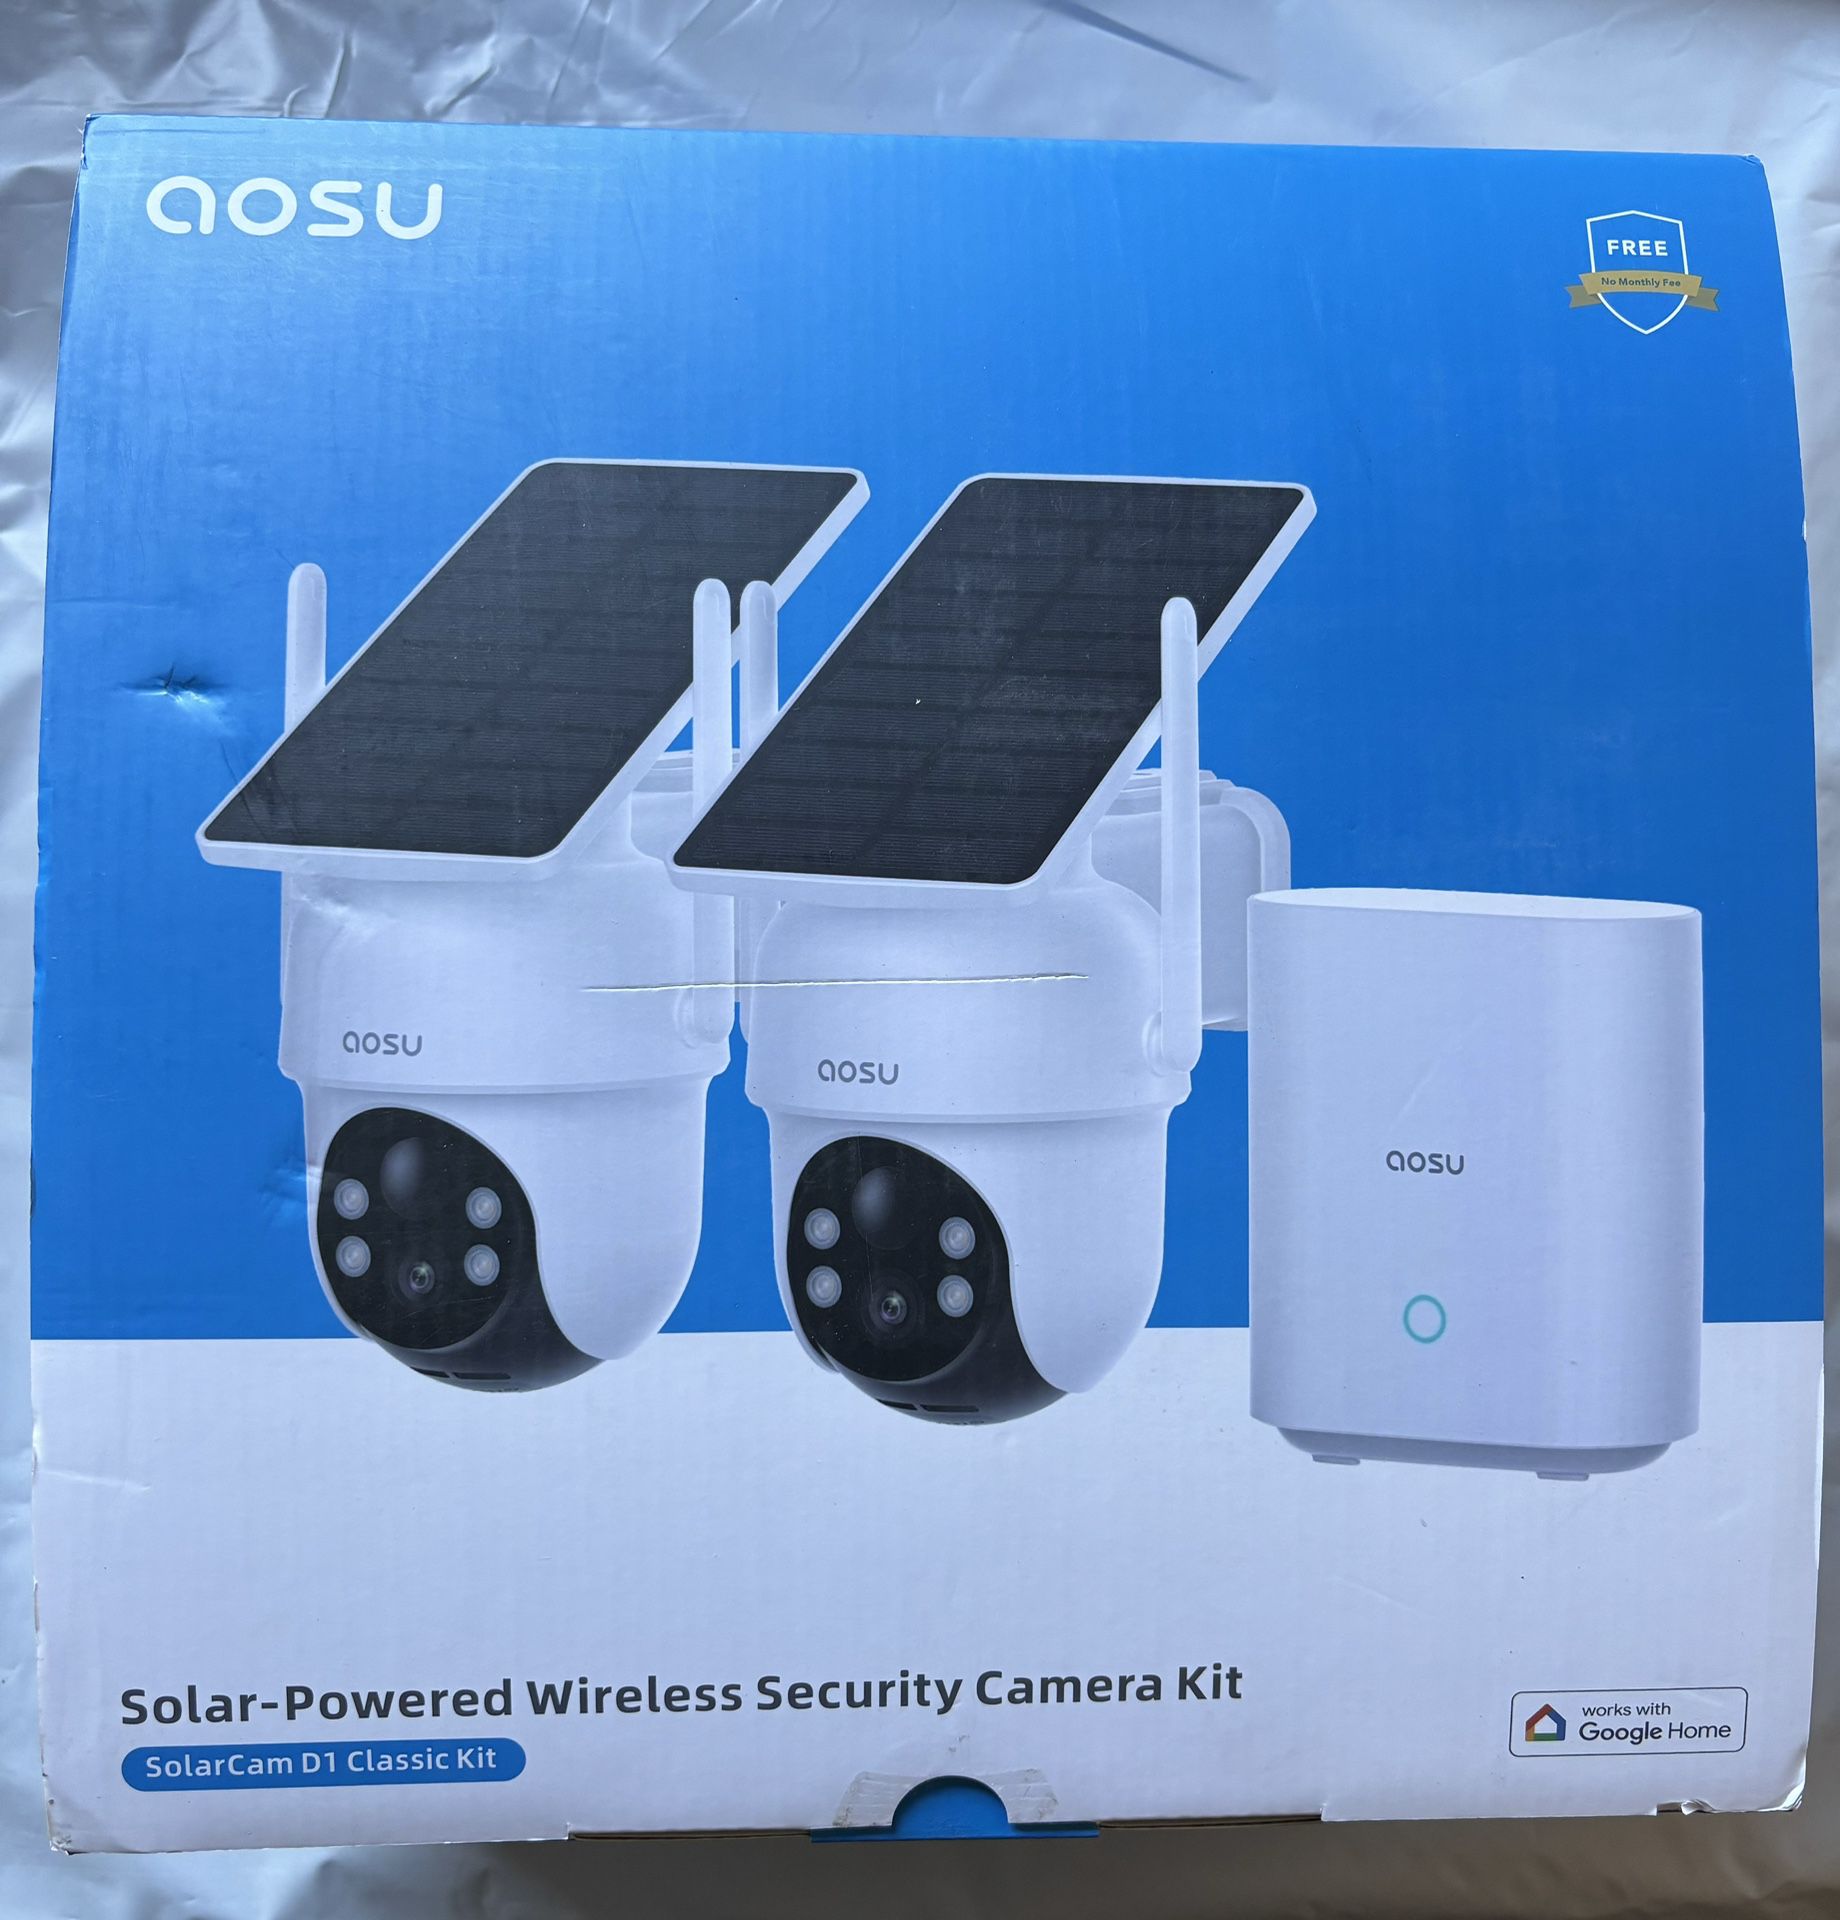 Security Cameras Outdoor Wireless, 2 Cam-Kit, No Subscription, Solar-Powered